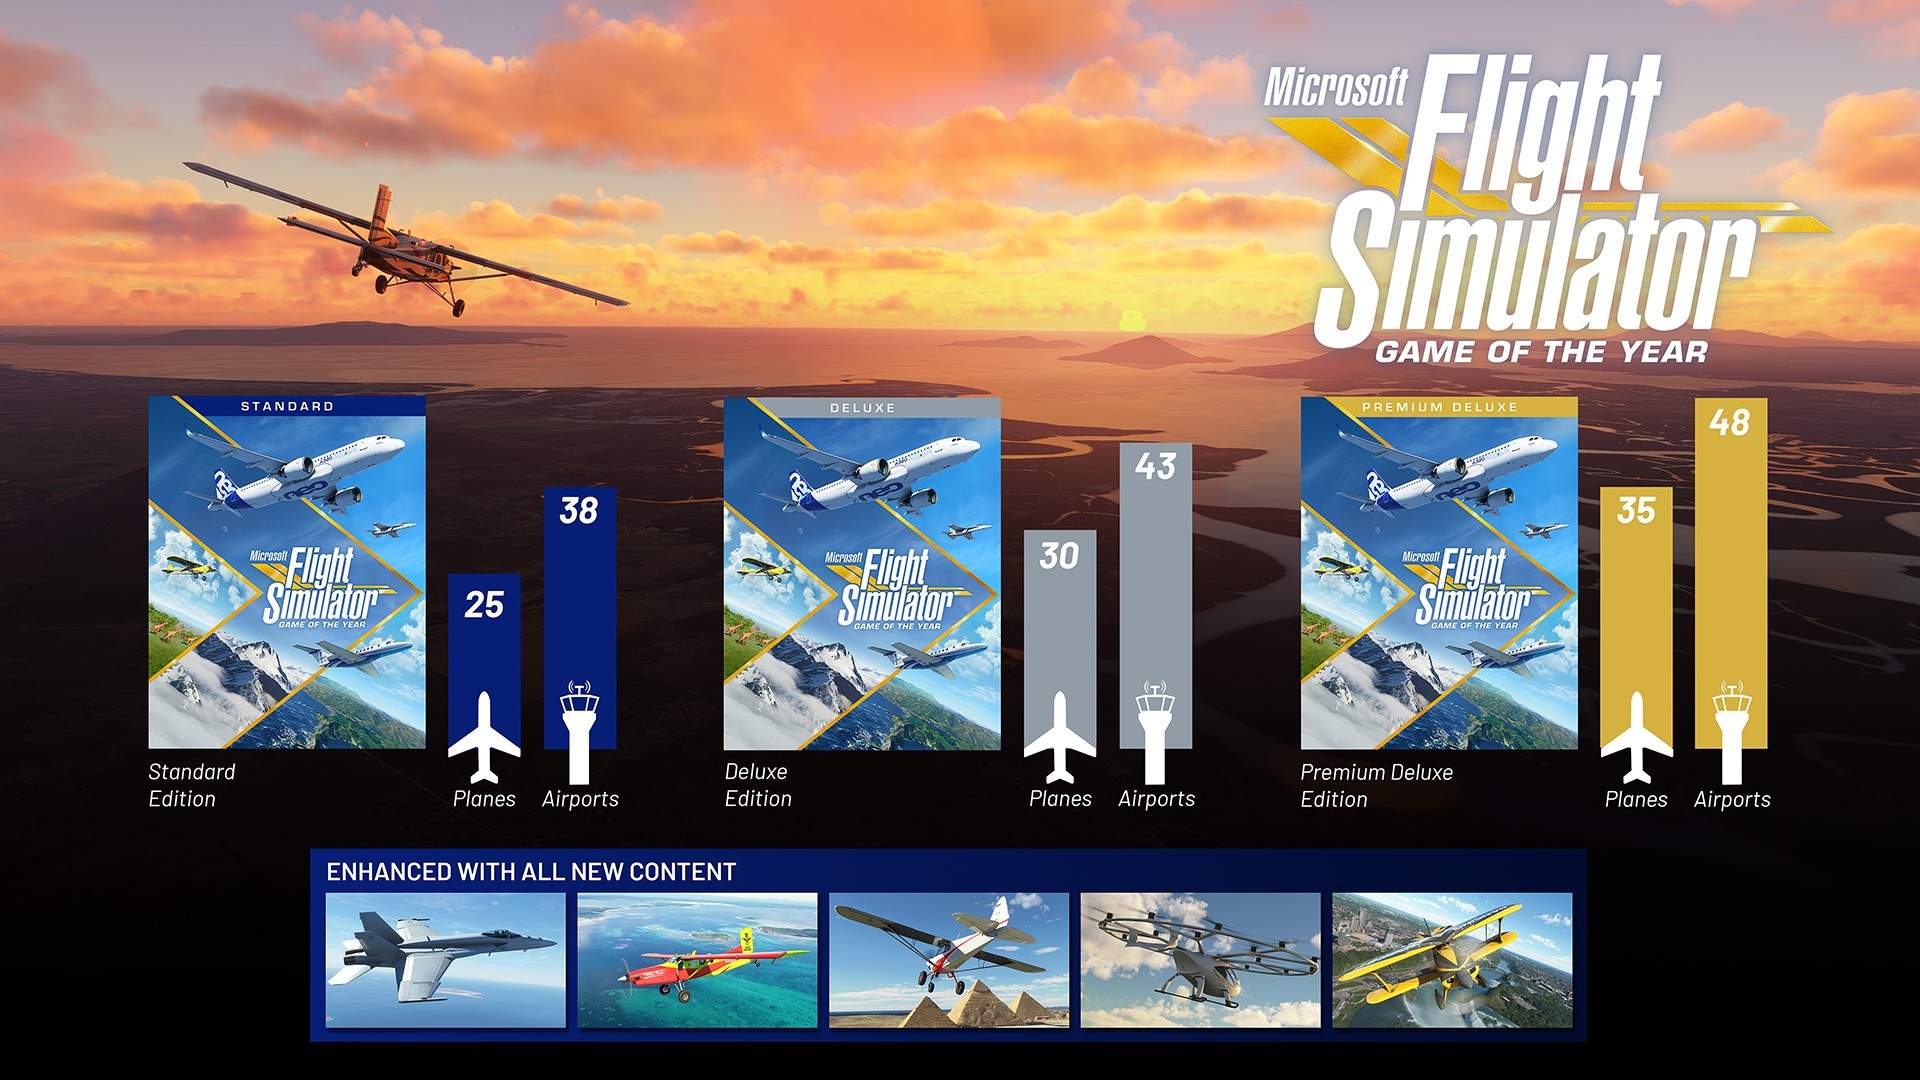 Microsoft Flight Simulator: Game of the Year Edition Available Today